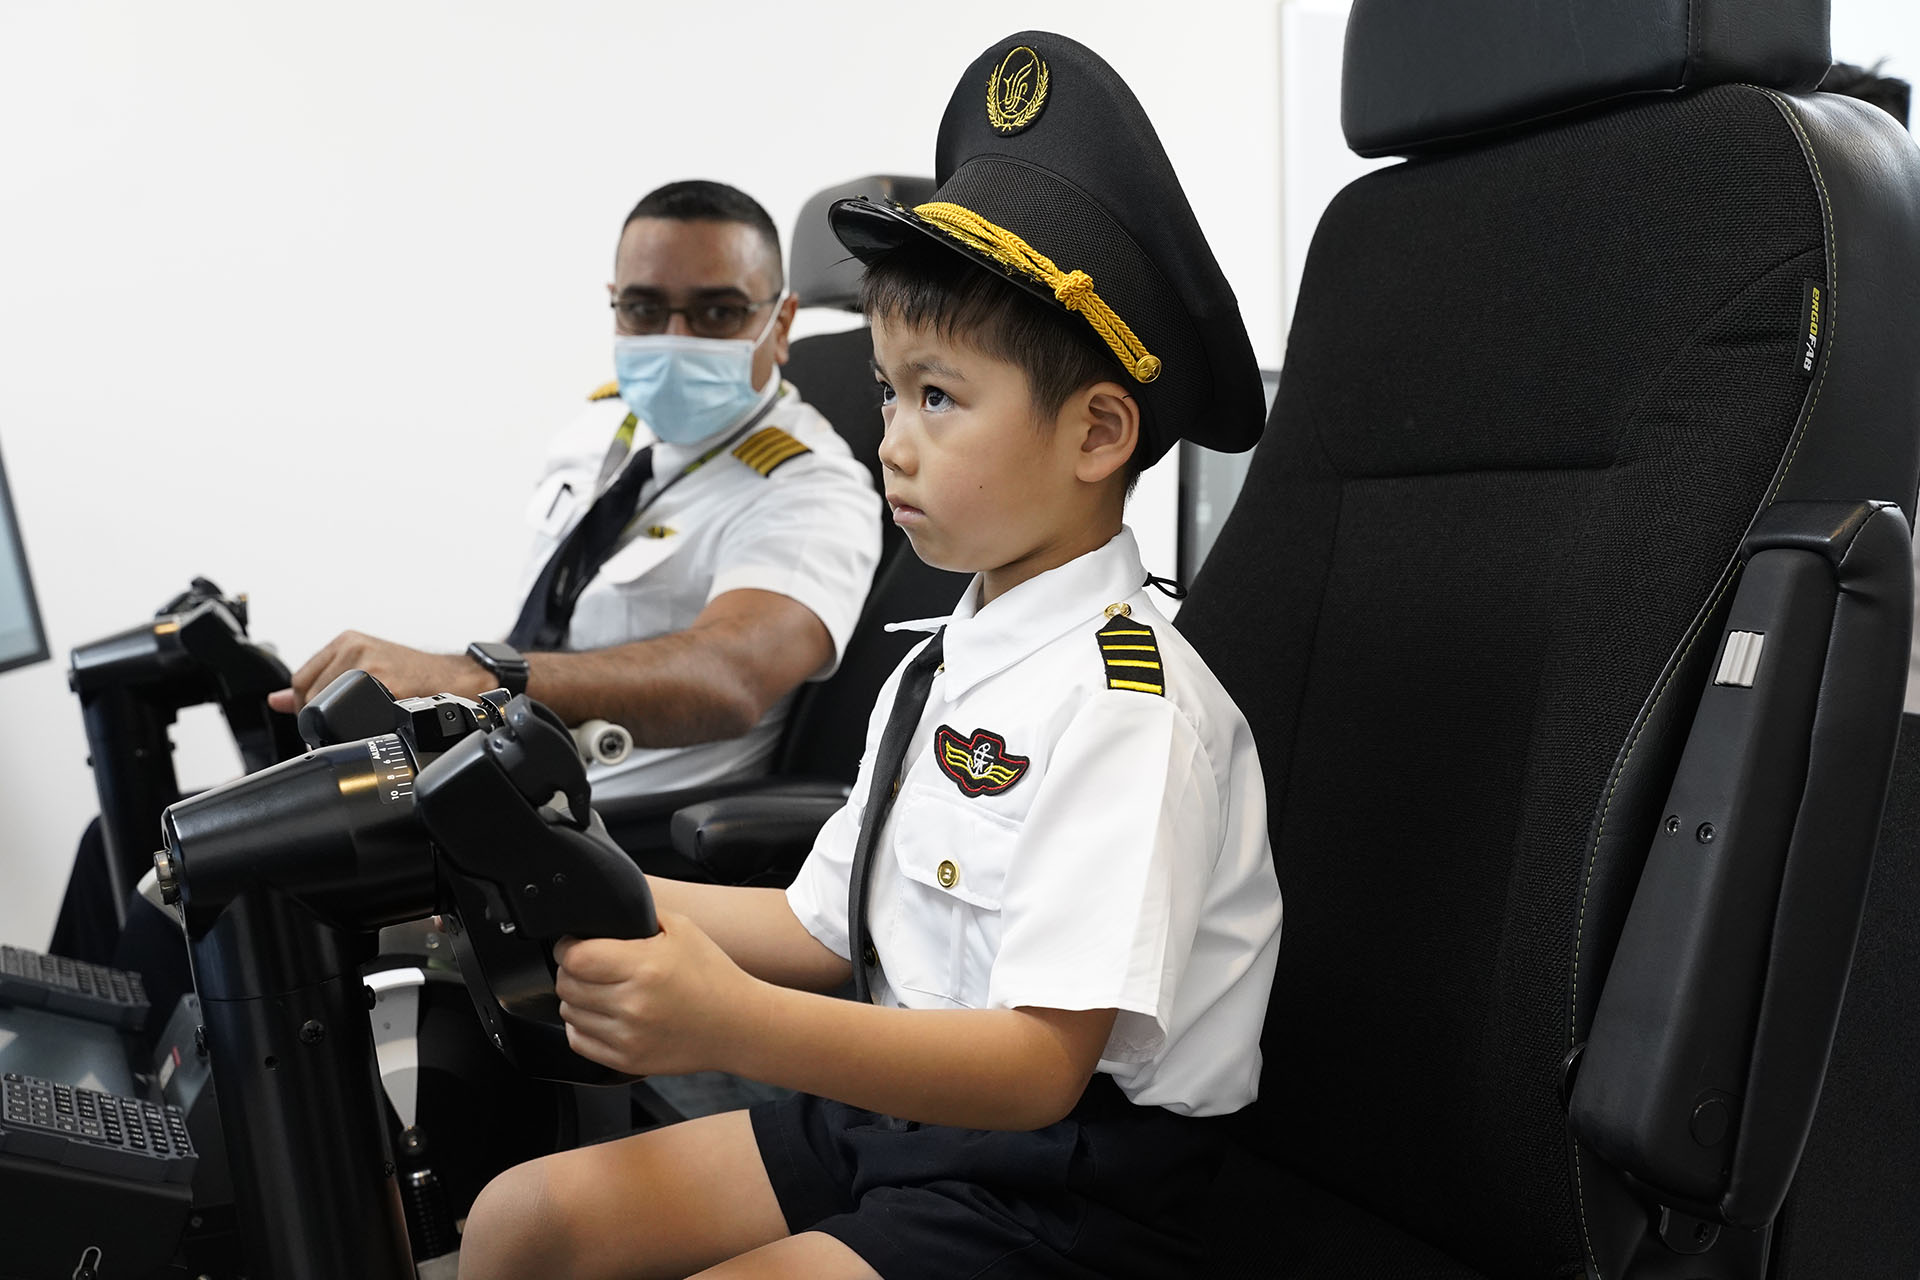 A junior pilot is being guided by an actual SIA pilot on the simulator